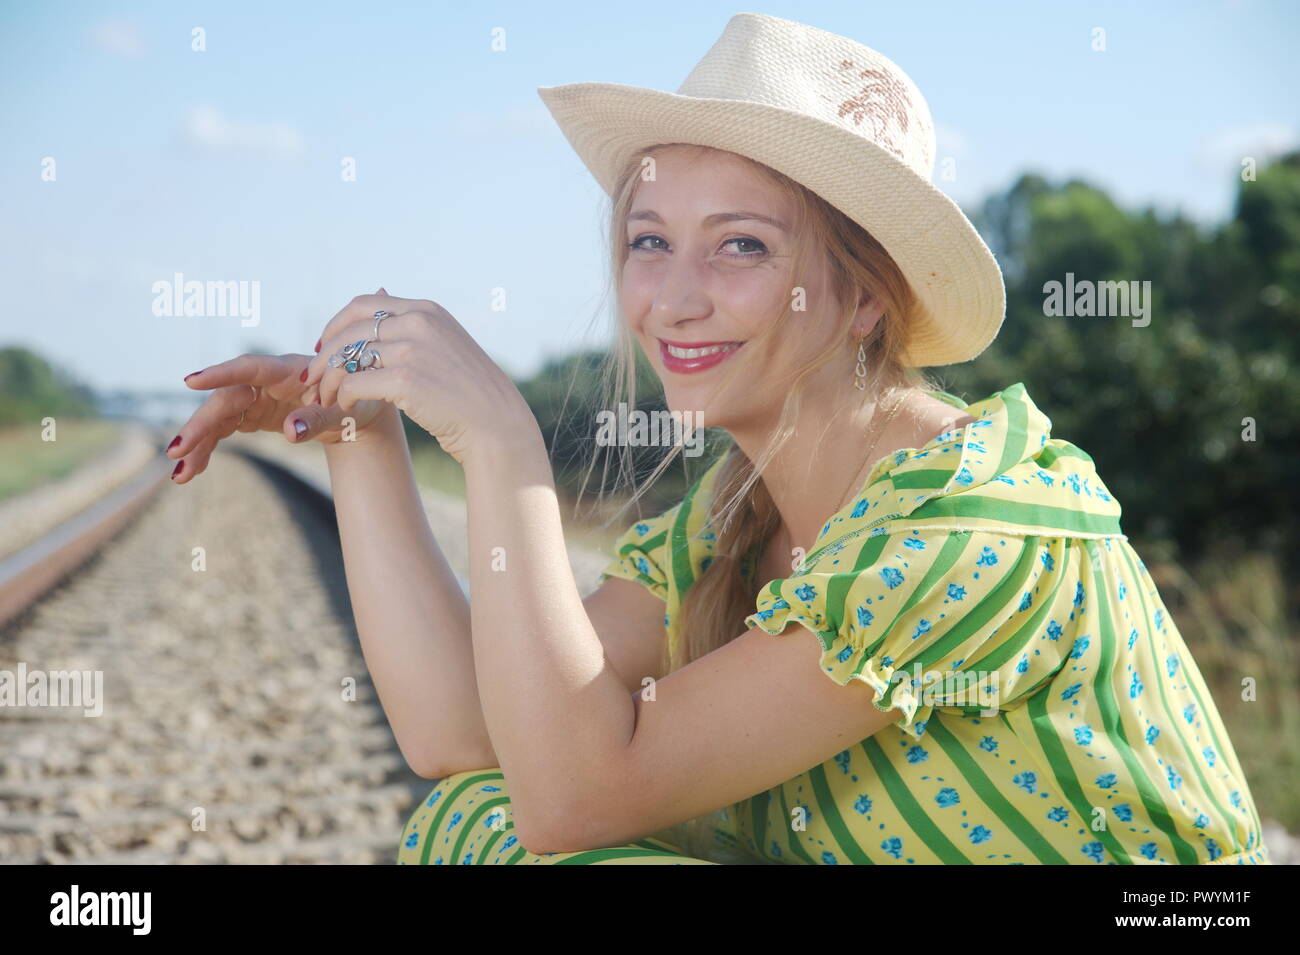 an amazing young blonde lady wait to locomotive, try stop train Stock Photo